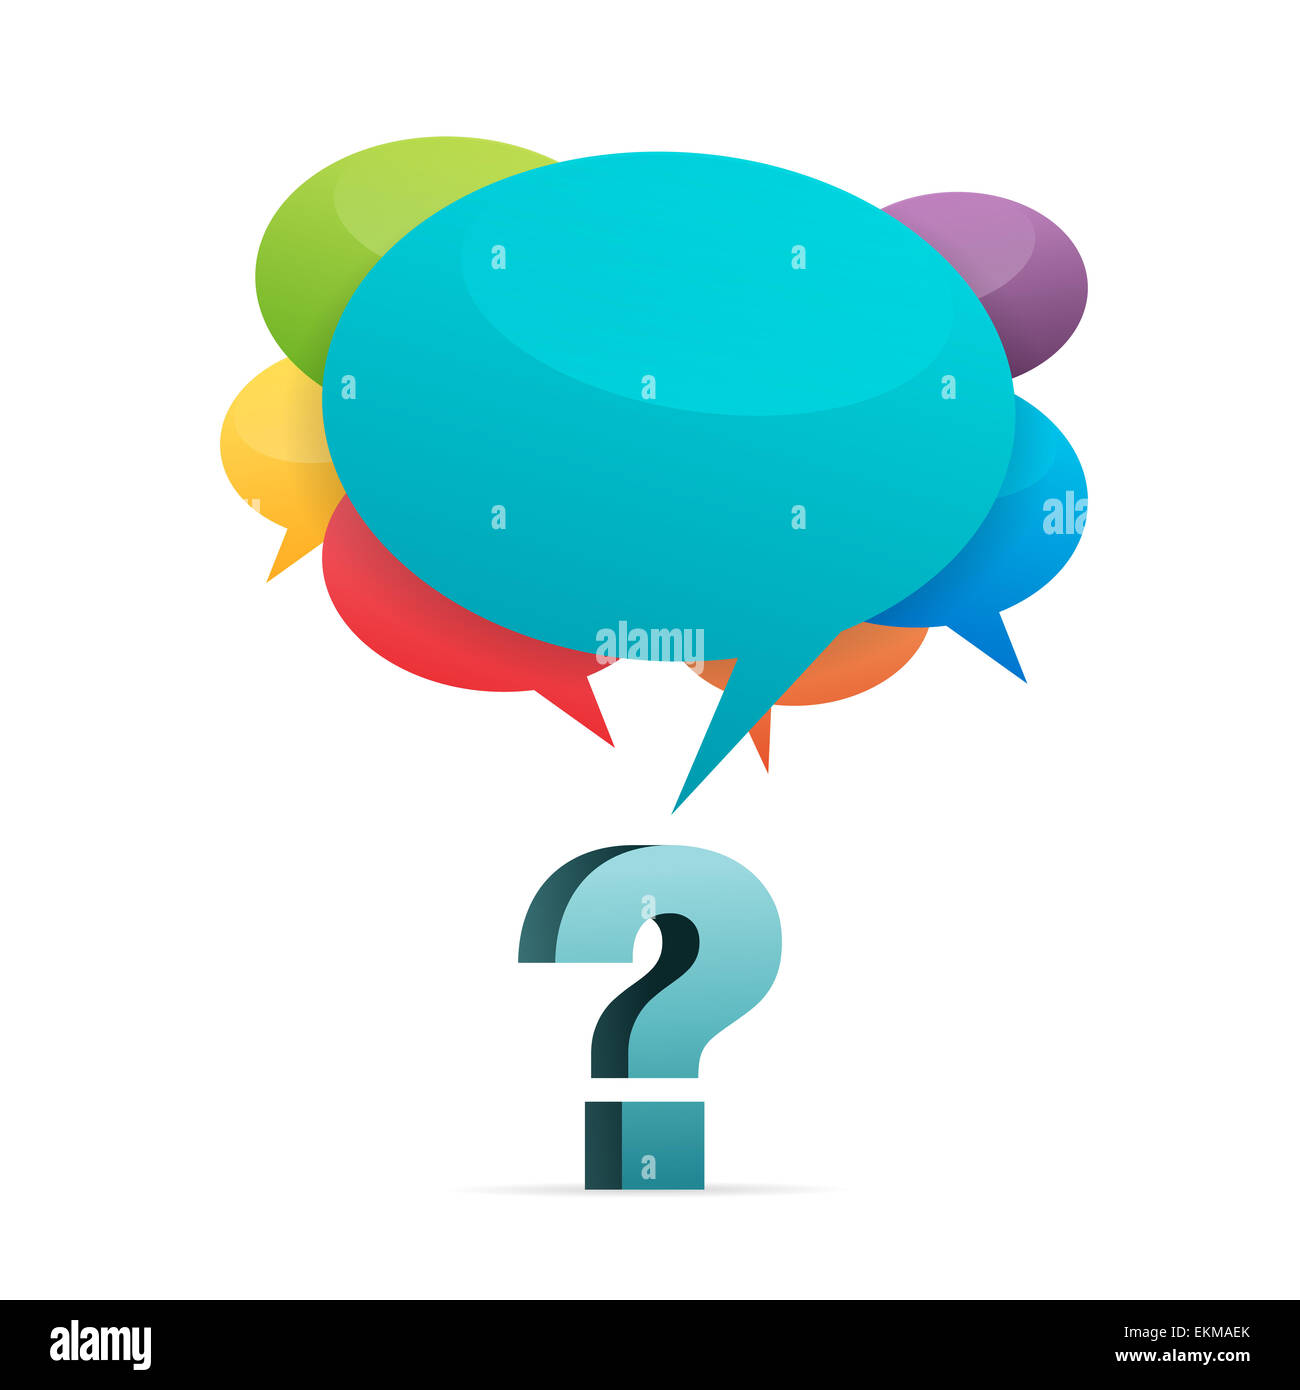 Vector illustration of a question mark with colorful talk bubbles. Stock Photo